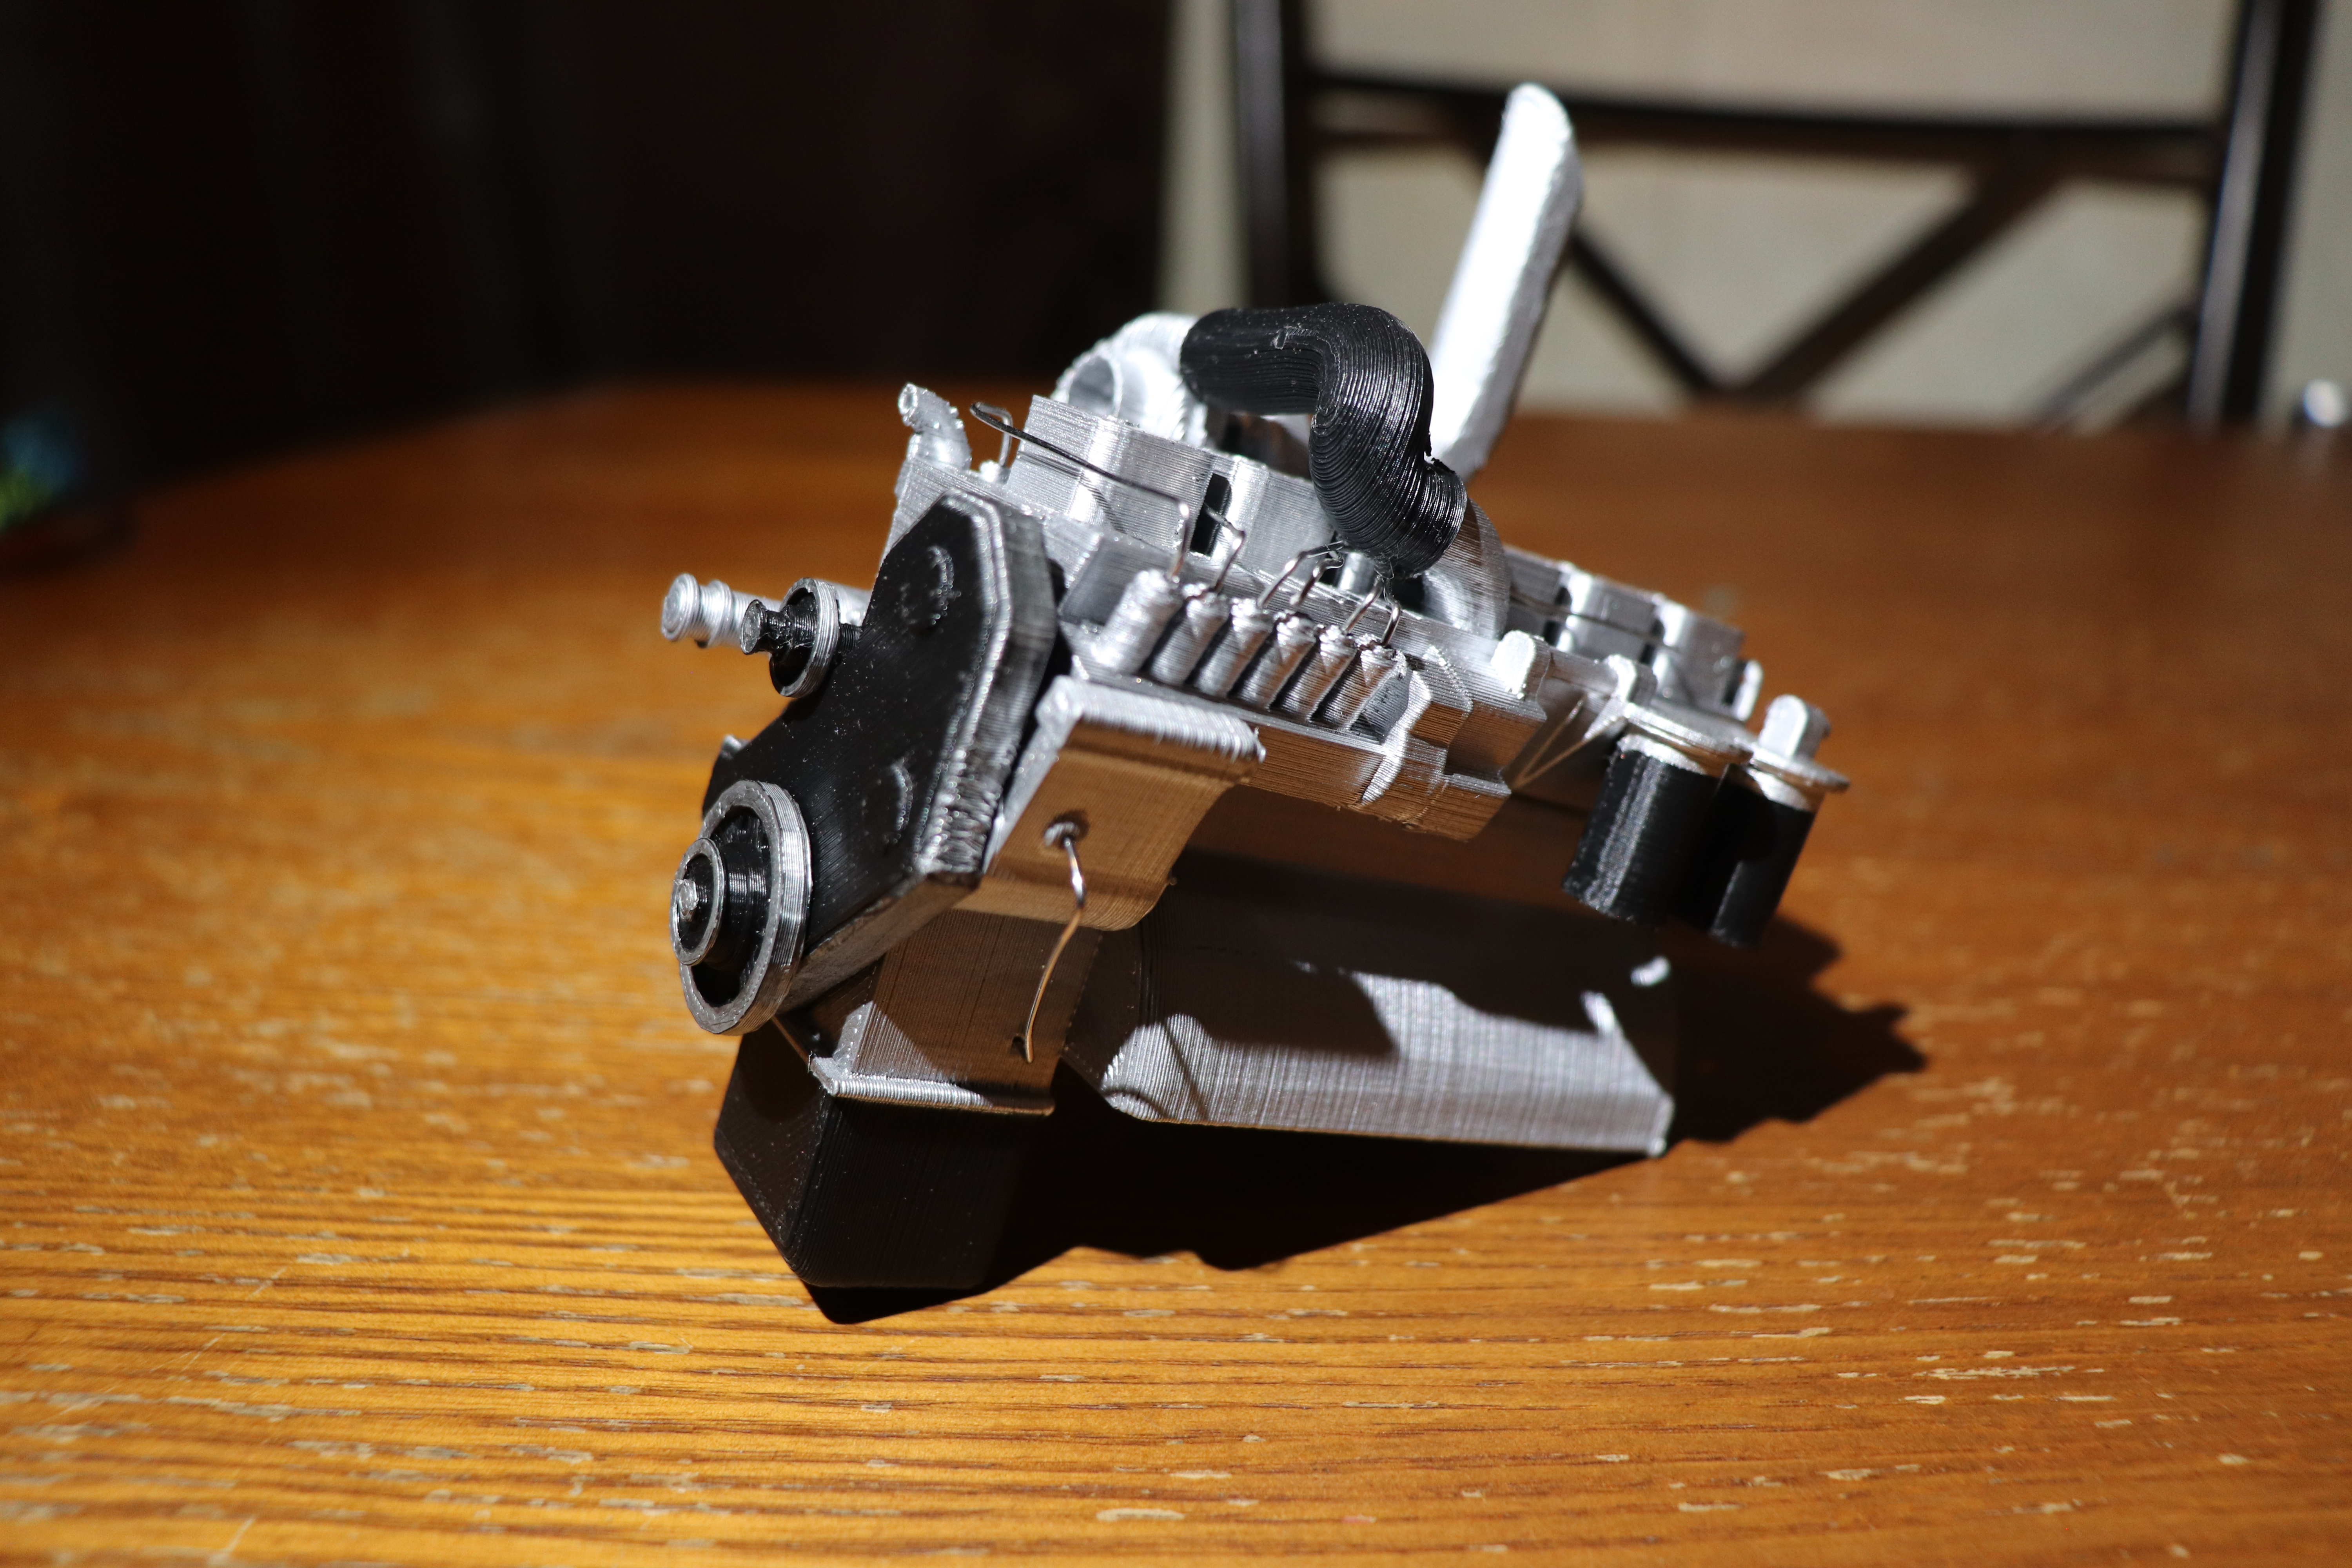 3D Printed 1/10 Scale Cummins Engine Motor Cover by Will